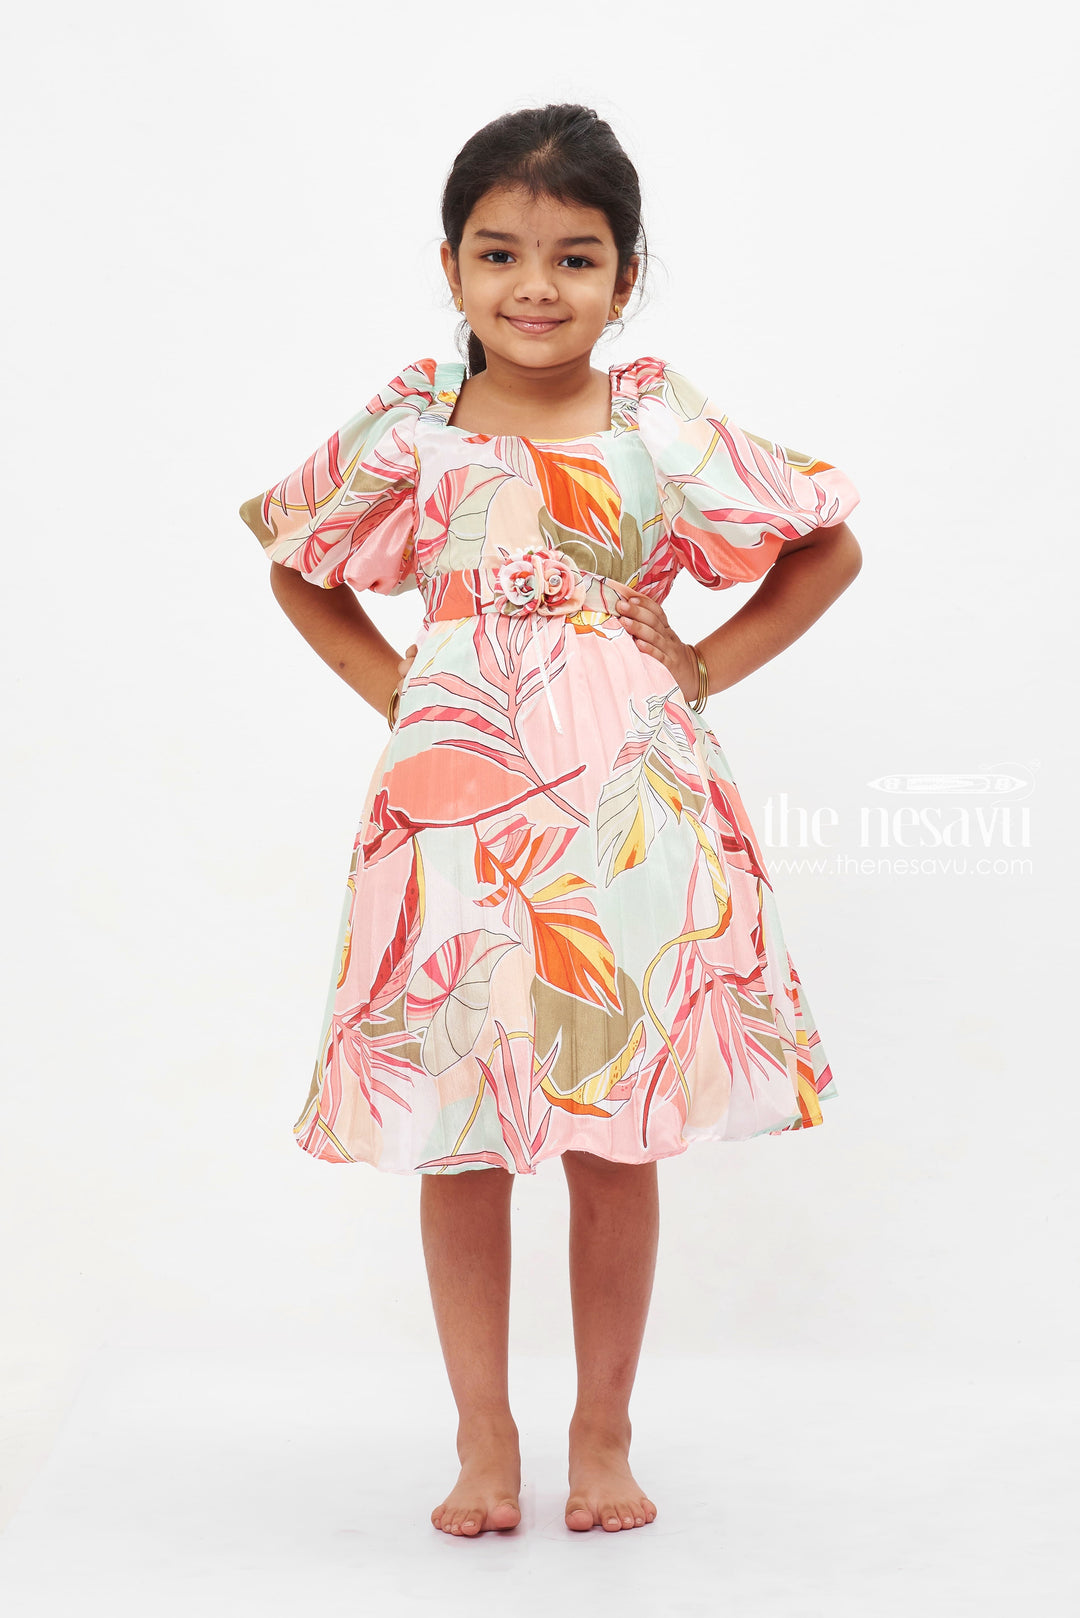 The Nesavu Girls Fancy Frock Tropical Sunset Puff Sleeve Dress: Girls' Colorful Botanical Print Frock with Rose Detail Nesavu 16 (1Y) / Red GFC1191A-16 Girls Botanical Print Puff Sleeve Dress | Vibrant Tropical Wear | Elegant Rose Detail Frock | The Nesavu